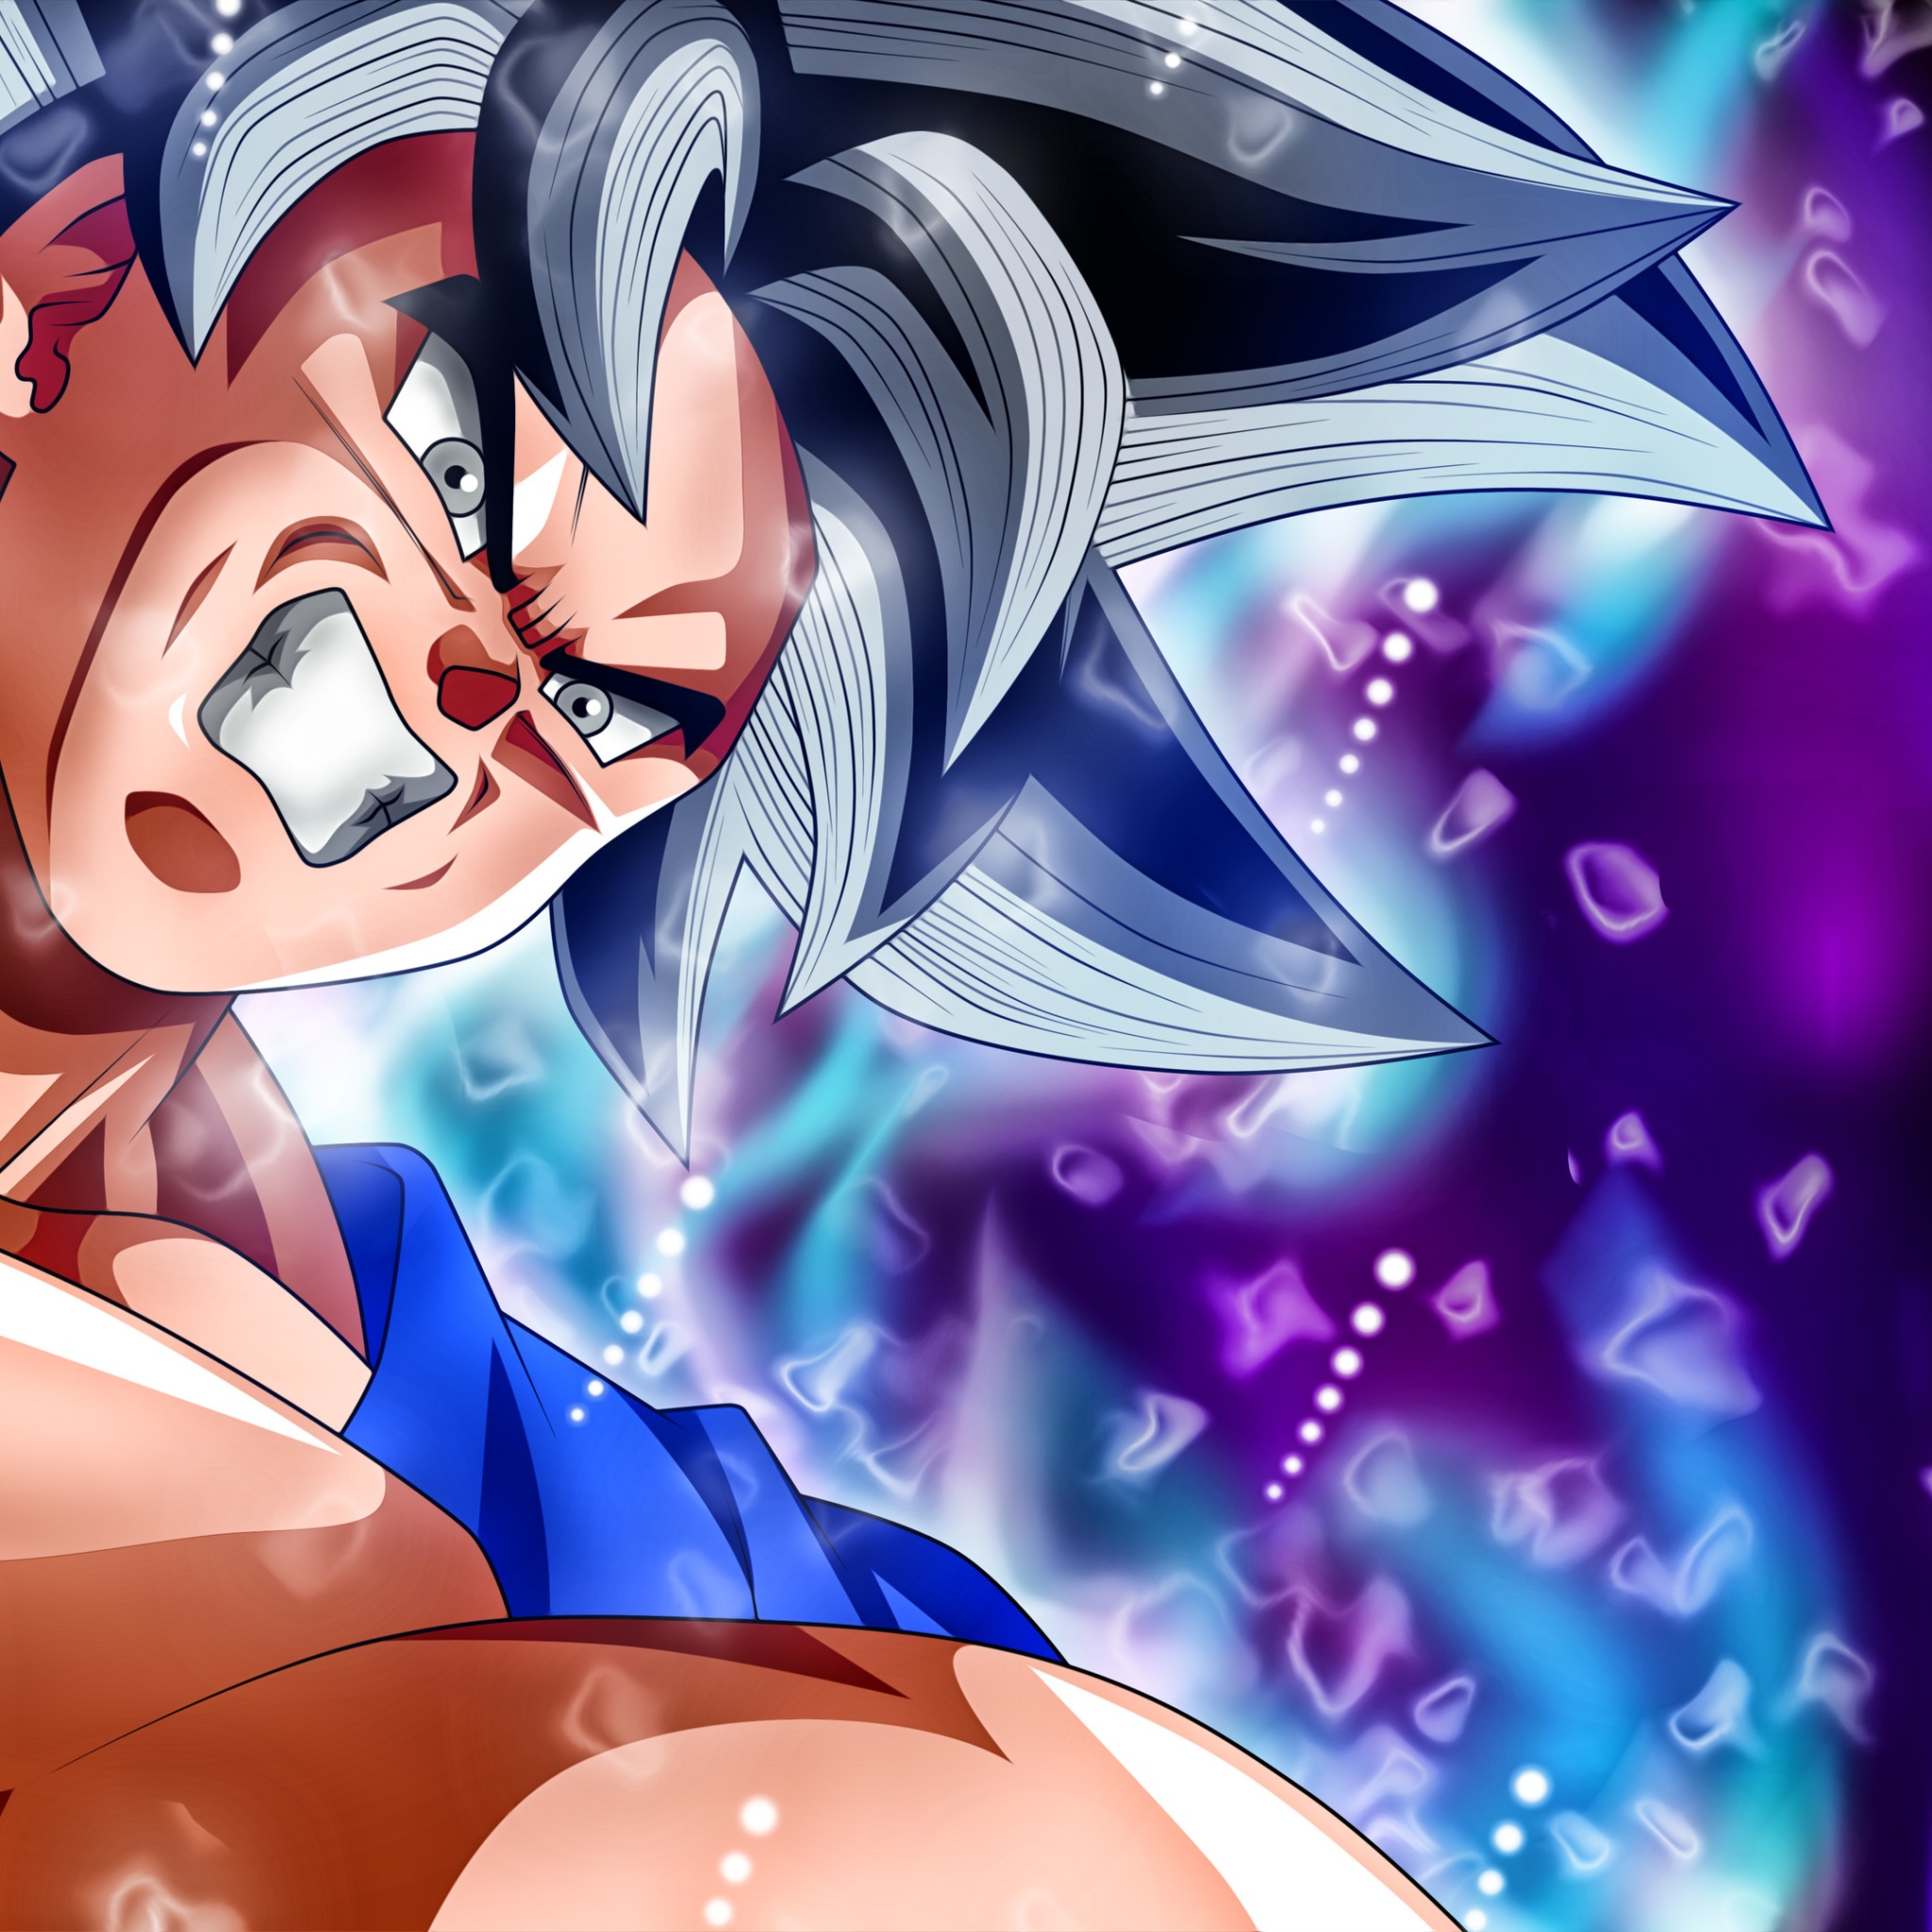 Son Goku in Dragon Ball Super 4K Wallpapers, HD Wallpapers